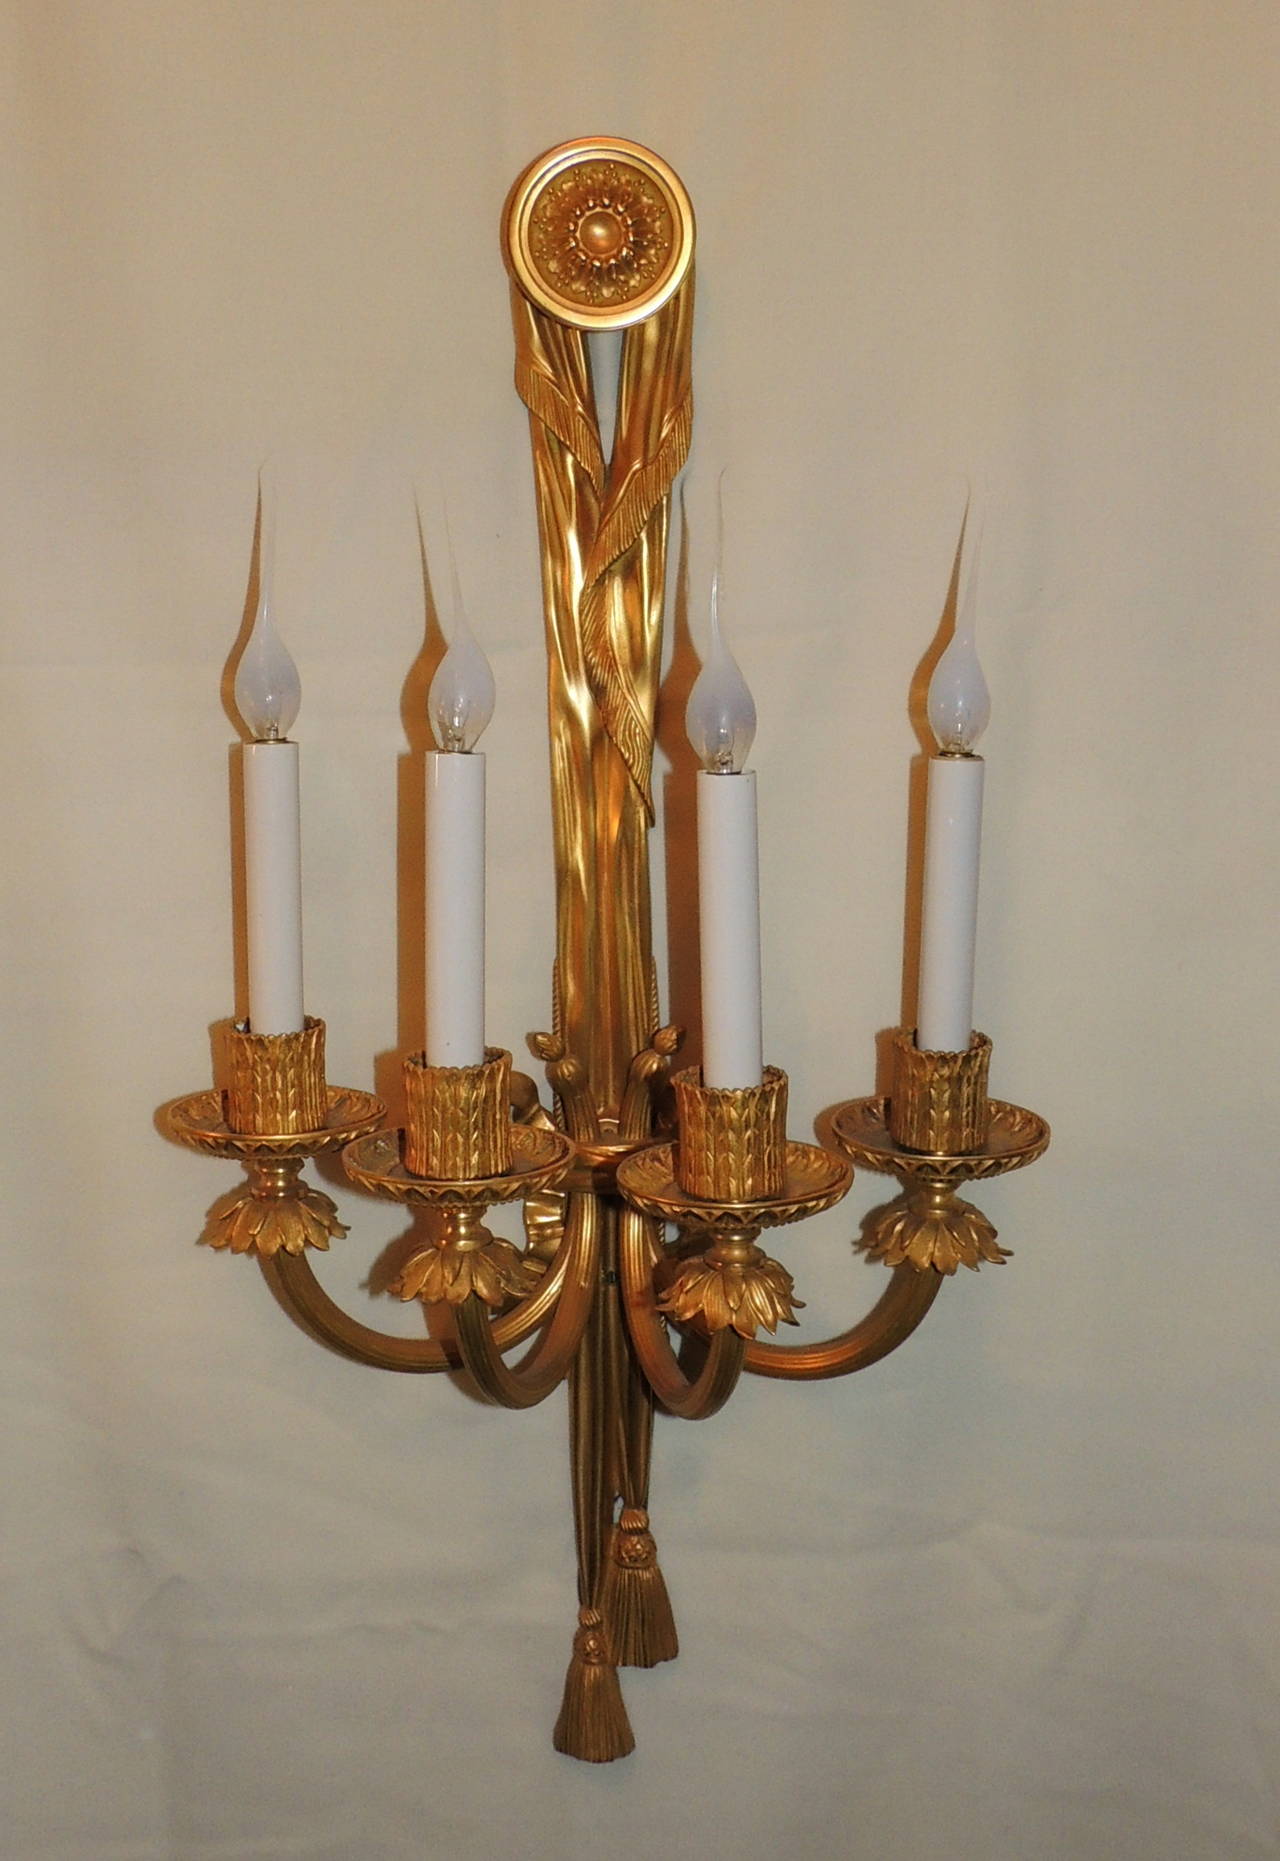 These beautiful doré bronze sconces are truly breathtaking. They are full of incredible detail, beginning from the long ribbon leading down to the beautiful bow in the center, to each intricate arm finishing at the tassel bottom. They have been